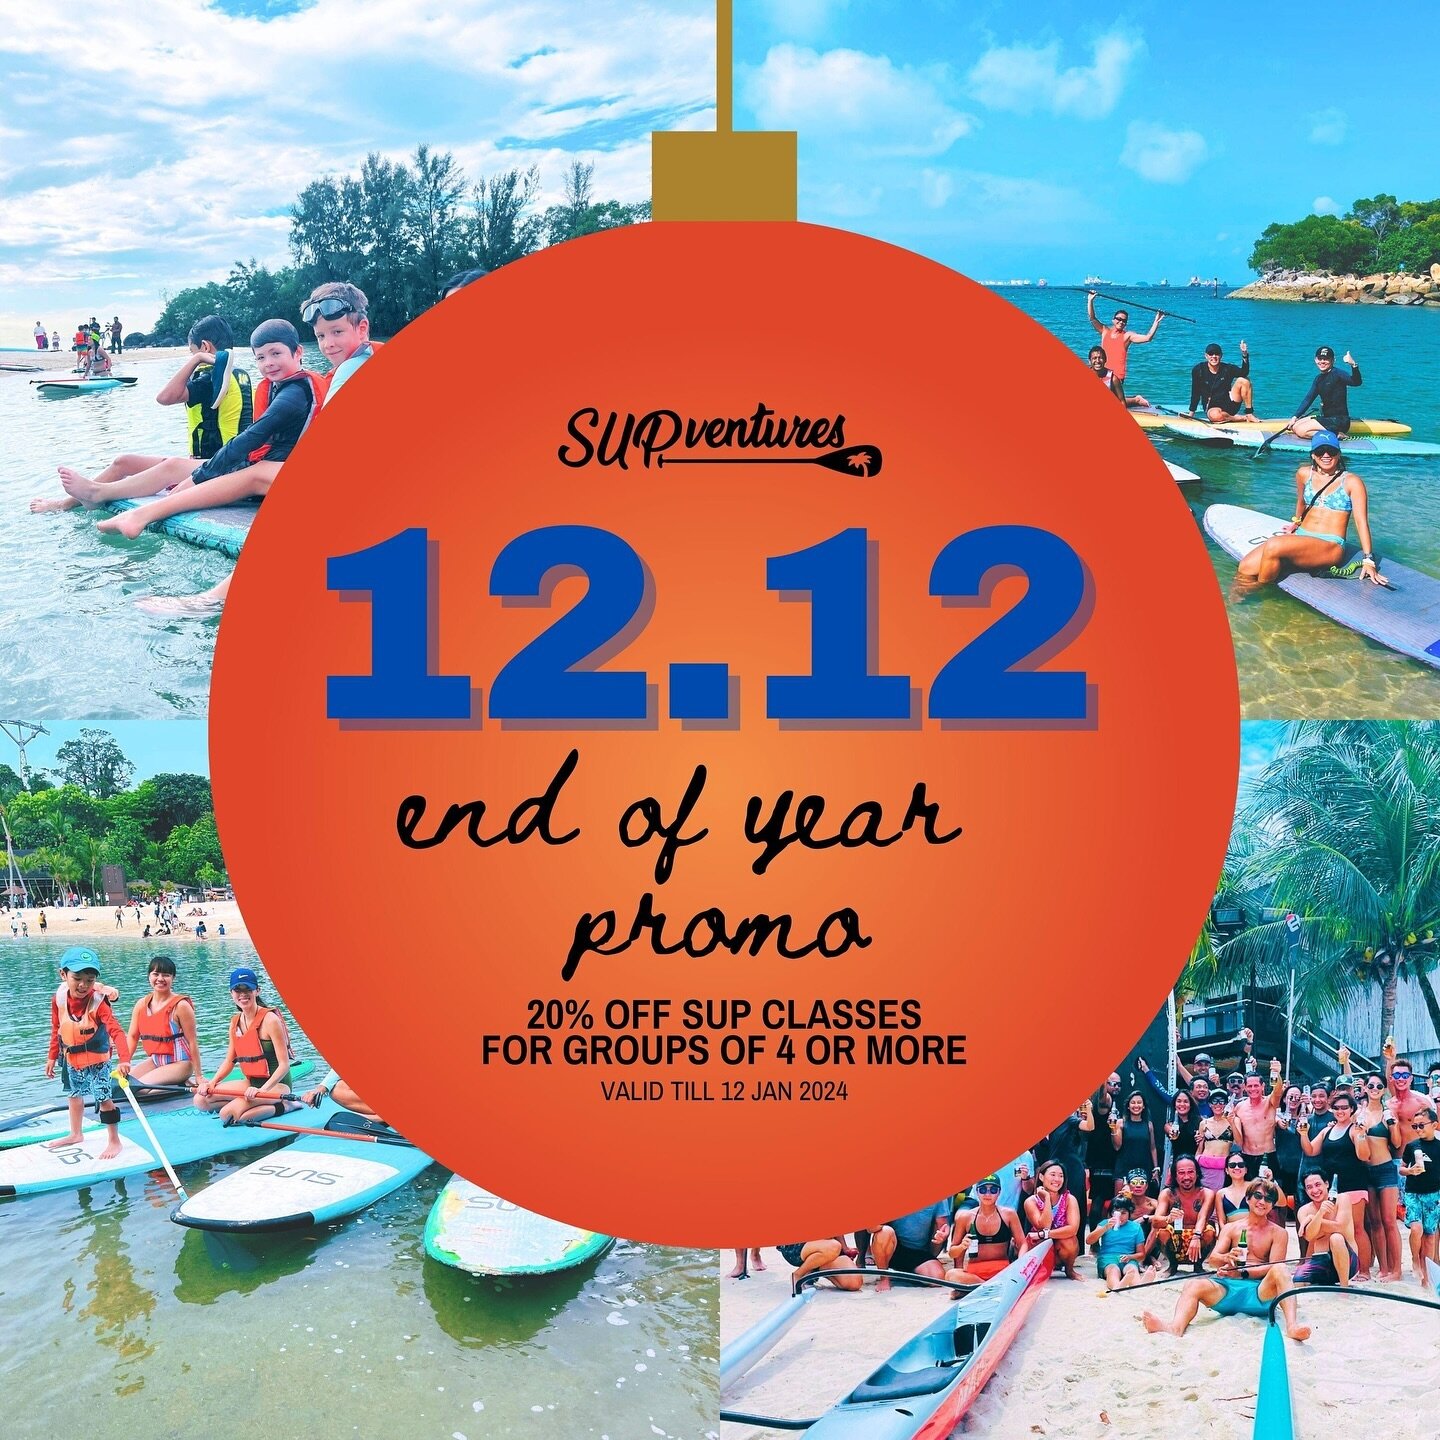 🎉RING IN THE FESTIVE SEASON WITH A 12.12 EXCLUSIVE!🎉

Get 20% off any SUPVentures classes for groups of 4 pax and up from now till 12th Jan 2024! 

Unlock this deal when you mention [SUPV1212] in your booking with us through WhatsApp at +65 9181 97